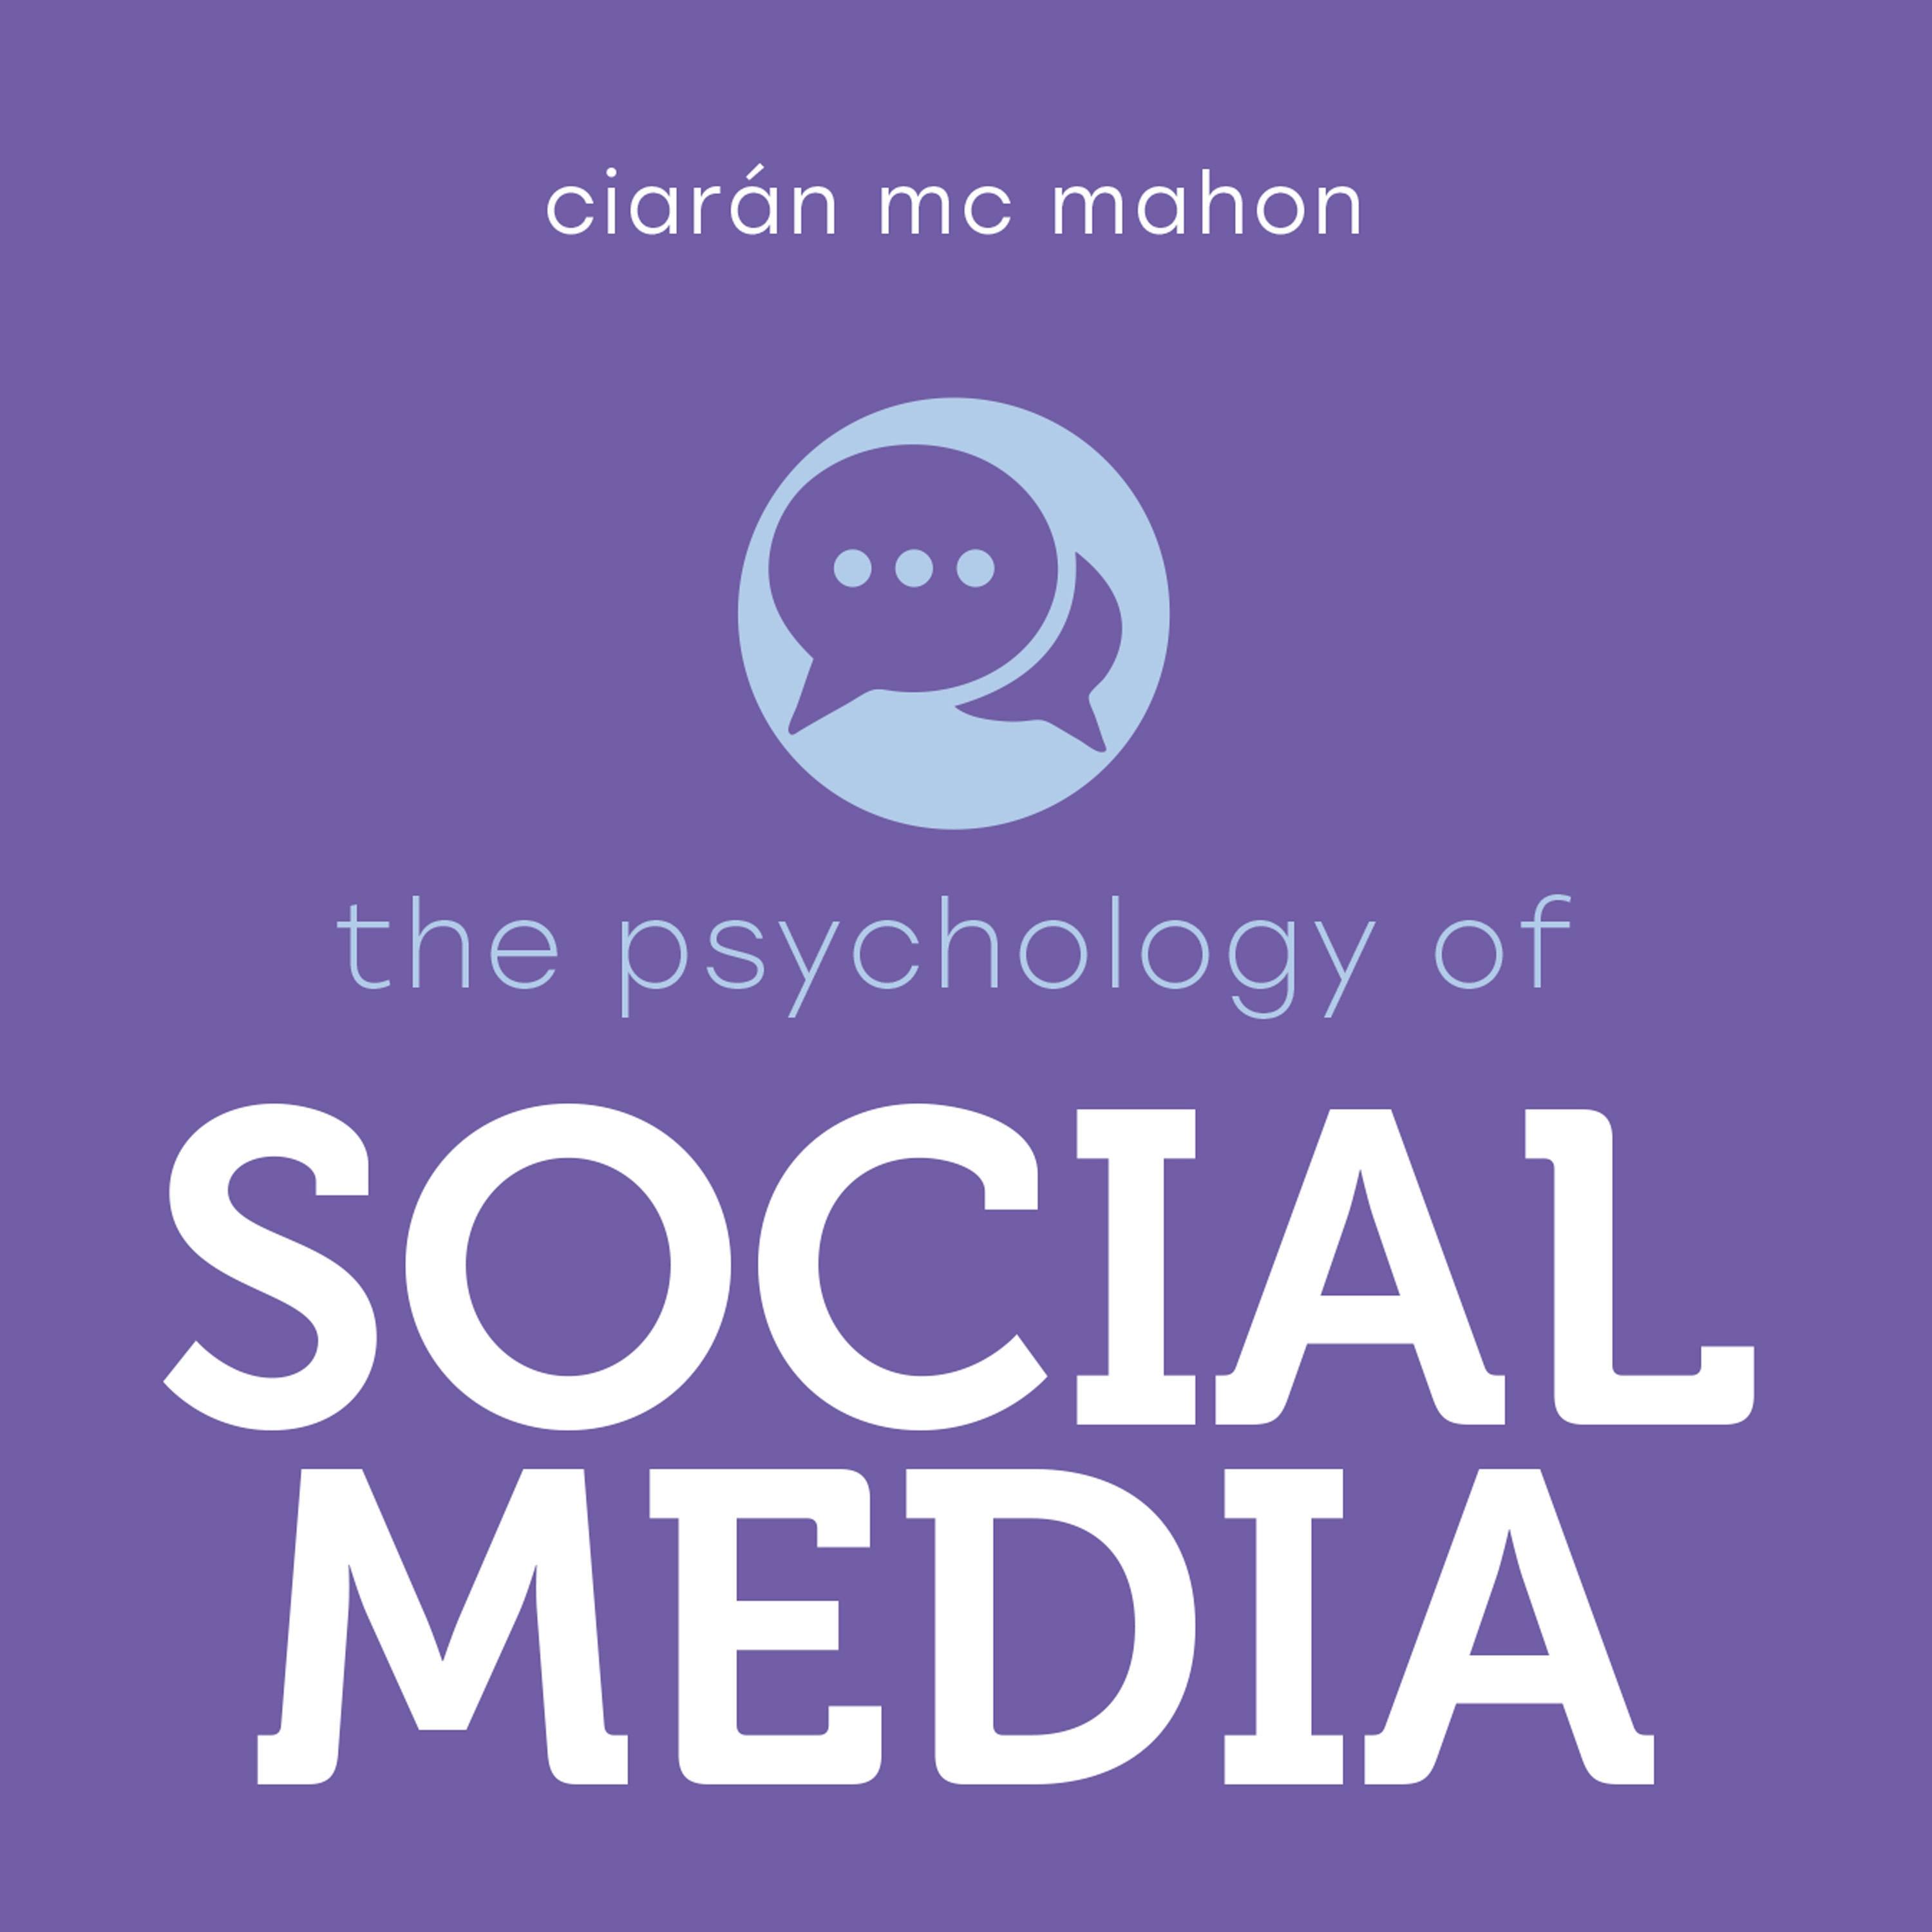 The Psychology of Social Media - undefined